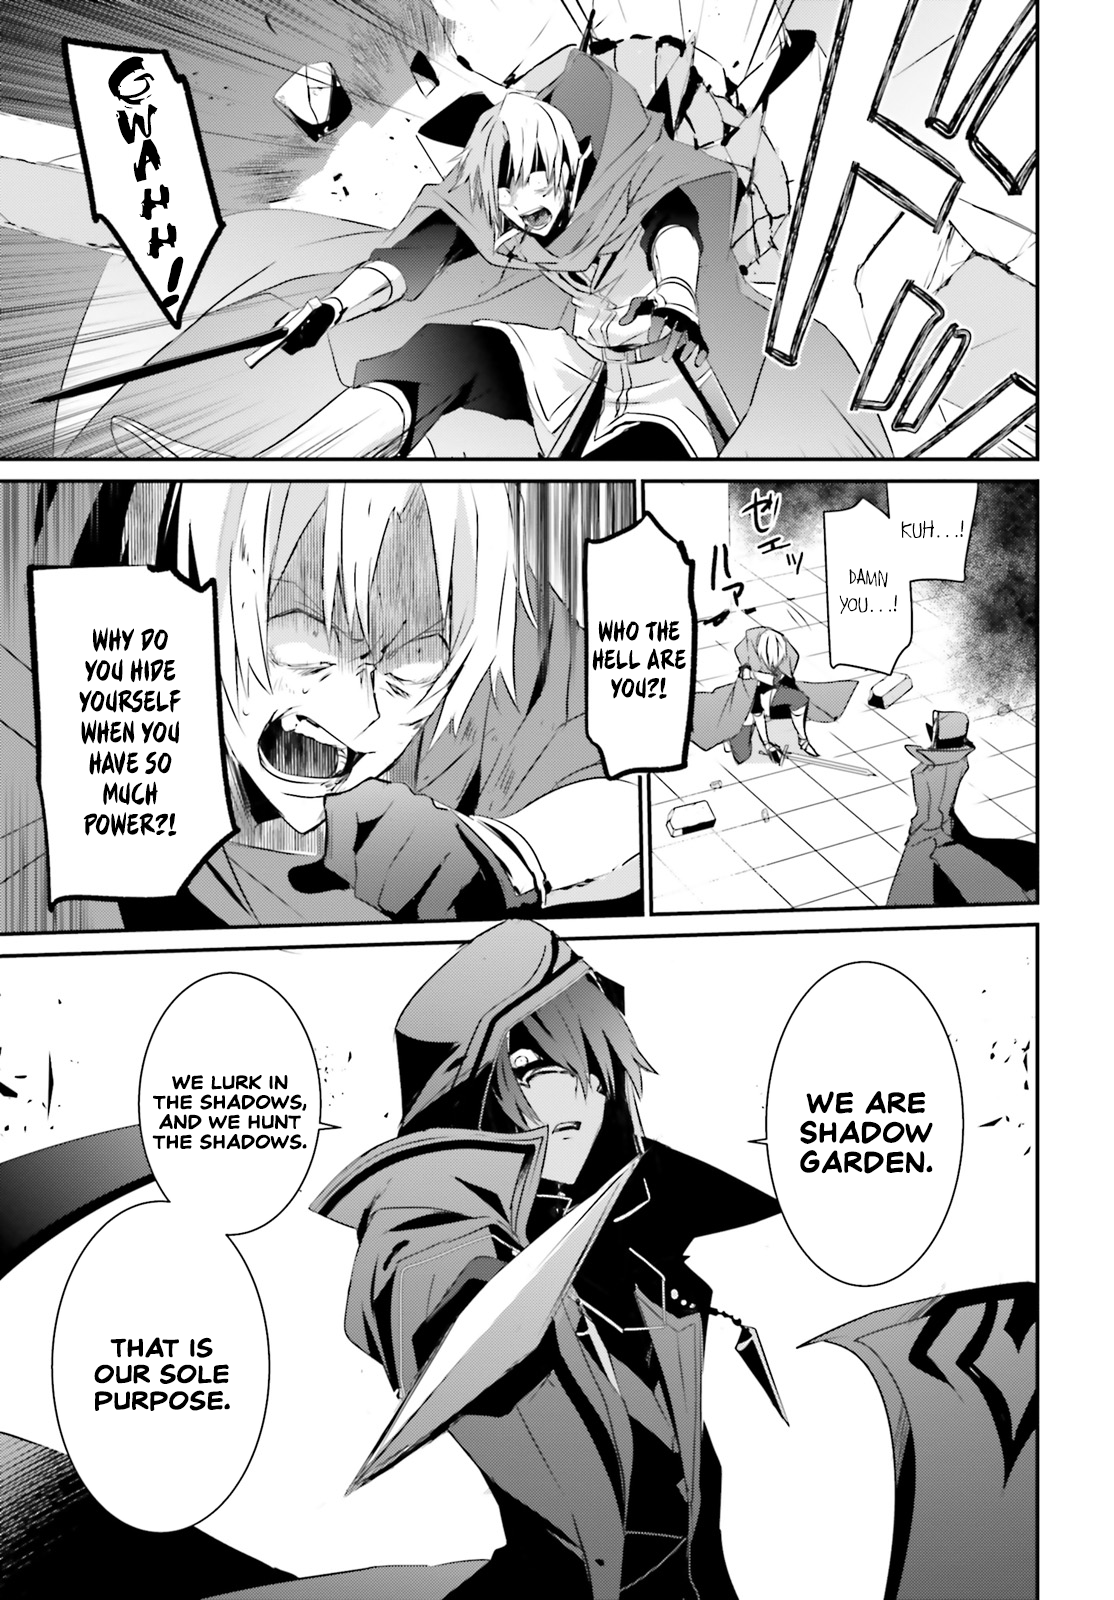 The Eminence In Shadow Chapter 6 The Eminence In Shadow Chapter 6 Page 21 Nine Anime Nah, nah the best part is all very interesting points about the manga. the eminence in shadow chapter 6 page